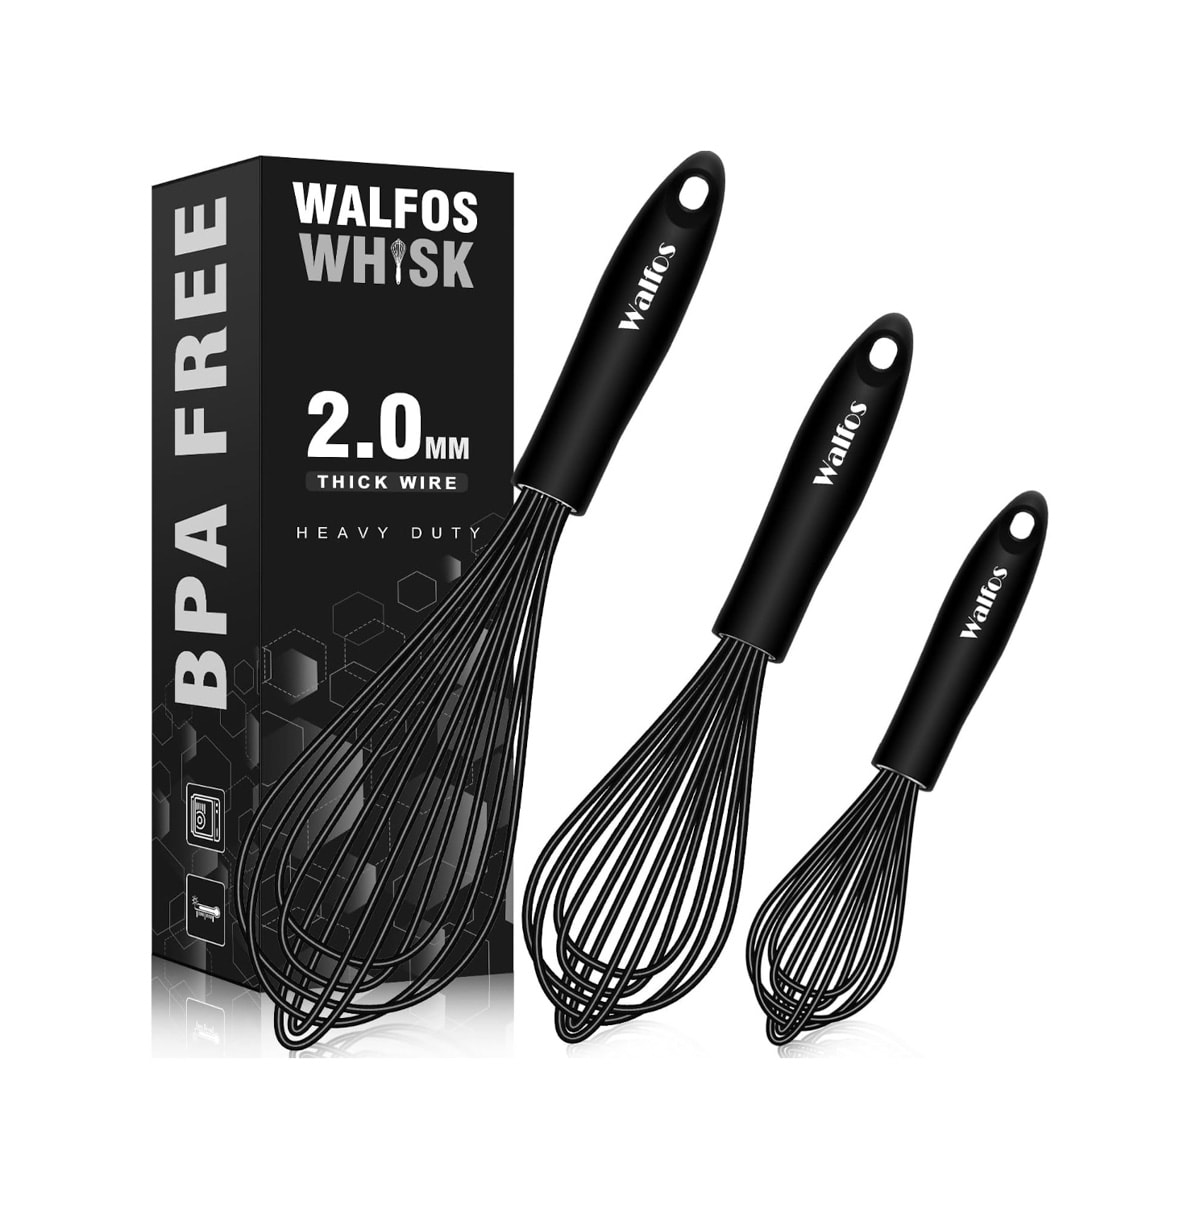 Set of three silicone whisks.